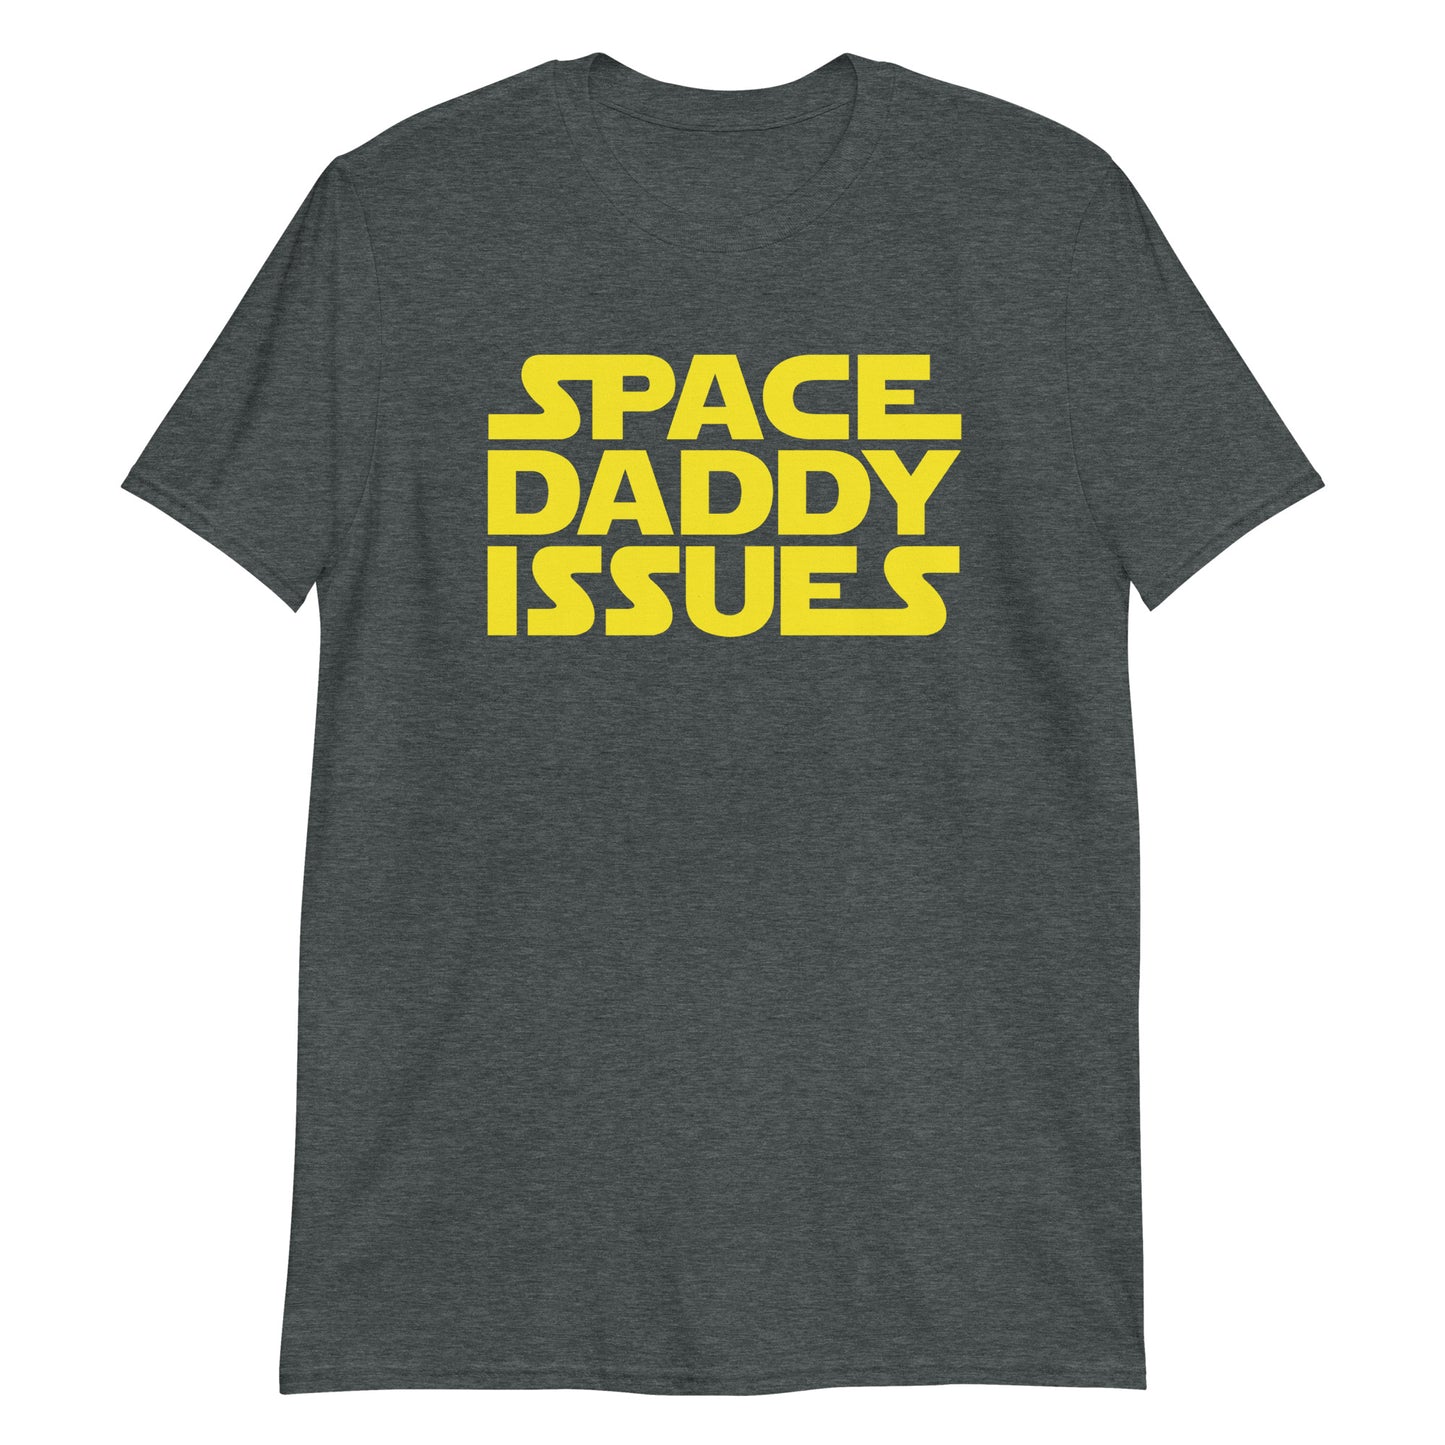 Space Daddy Issues t-shirt